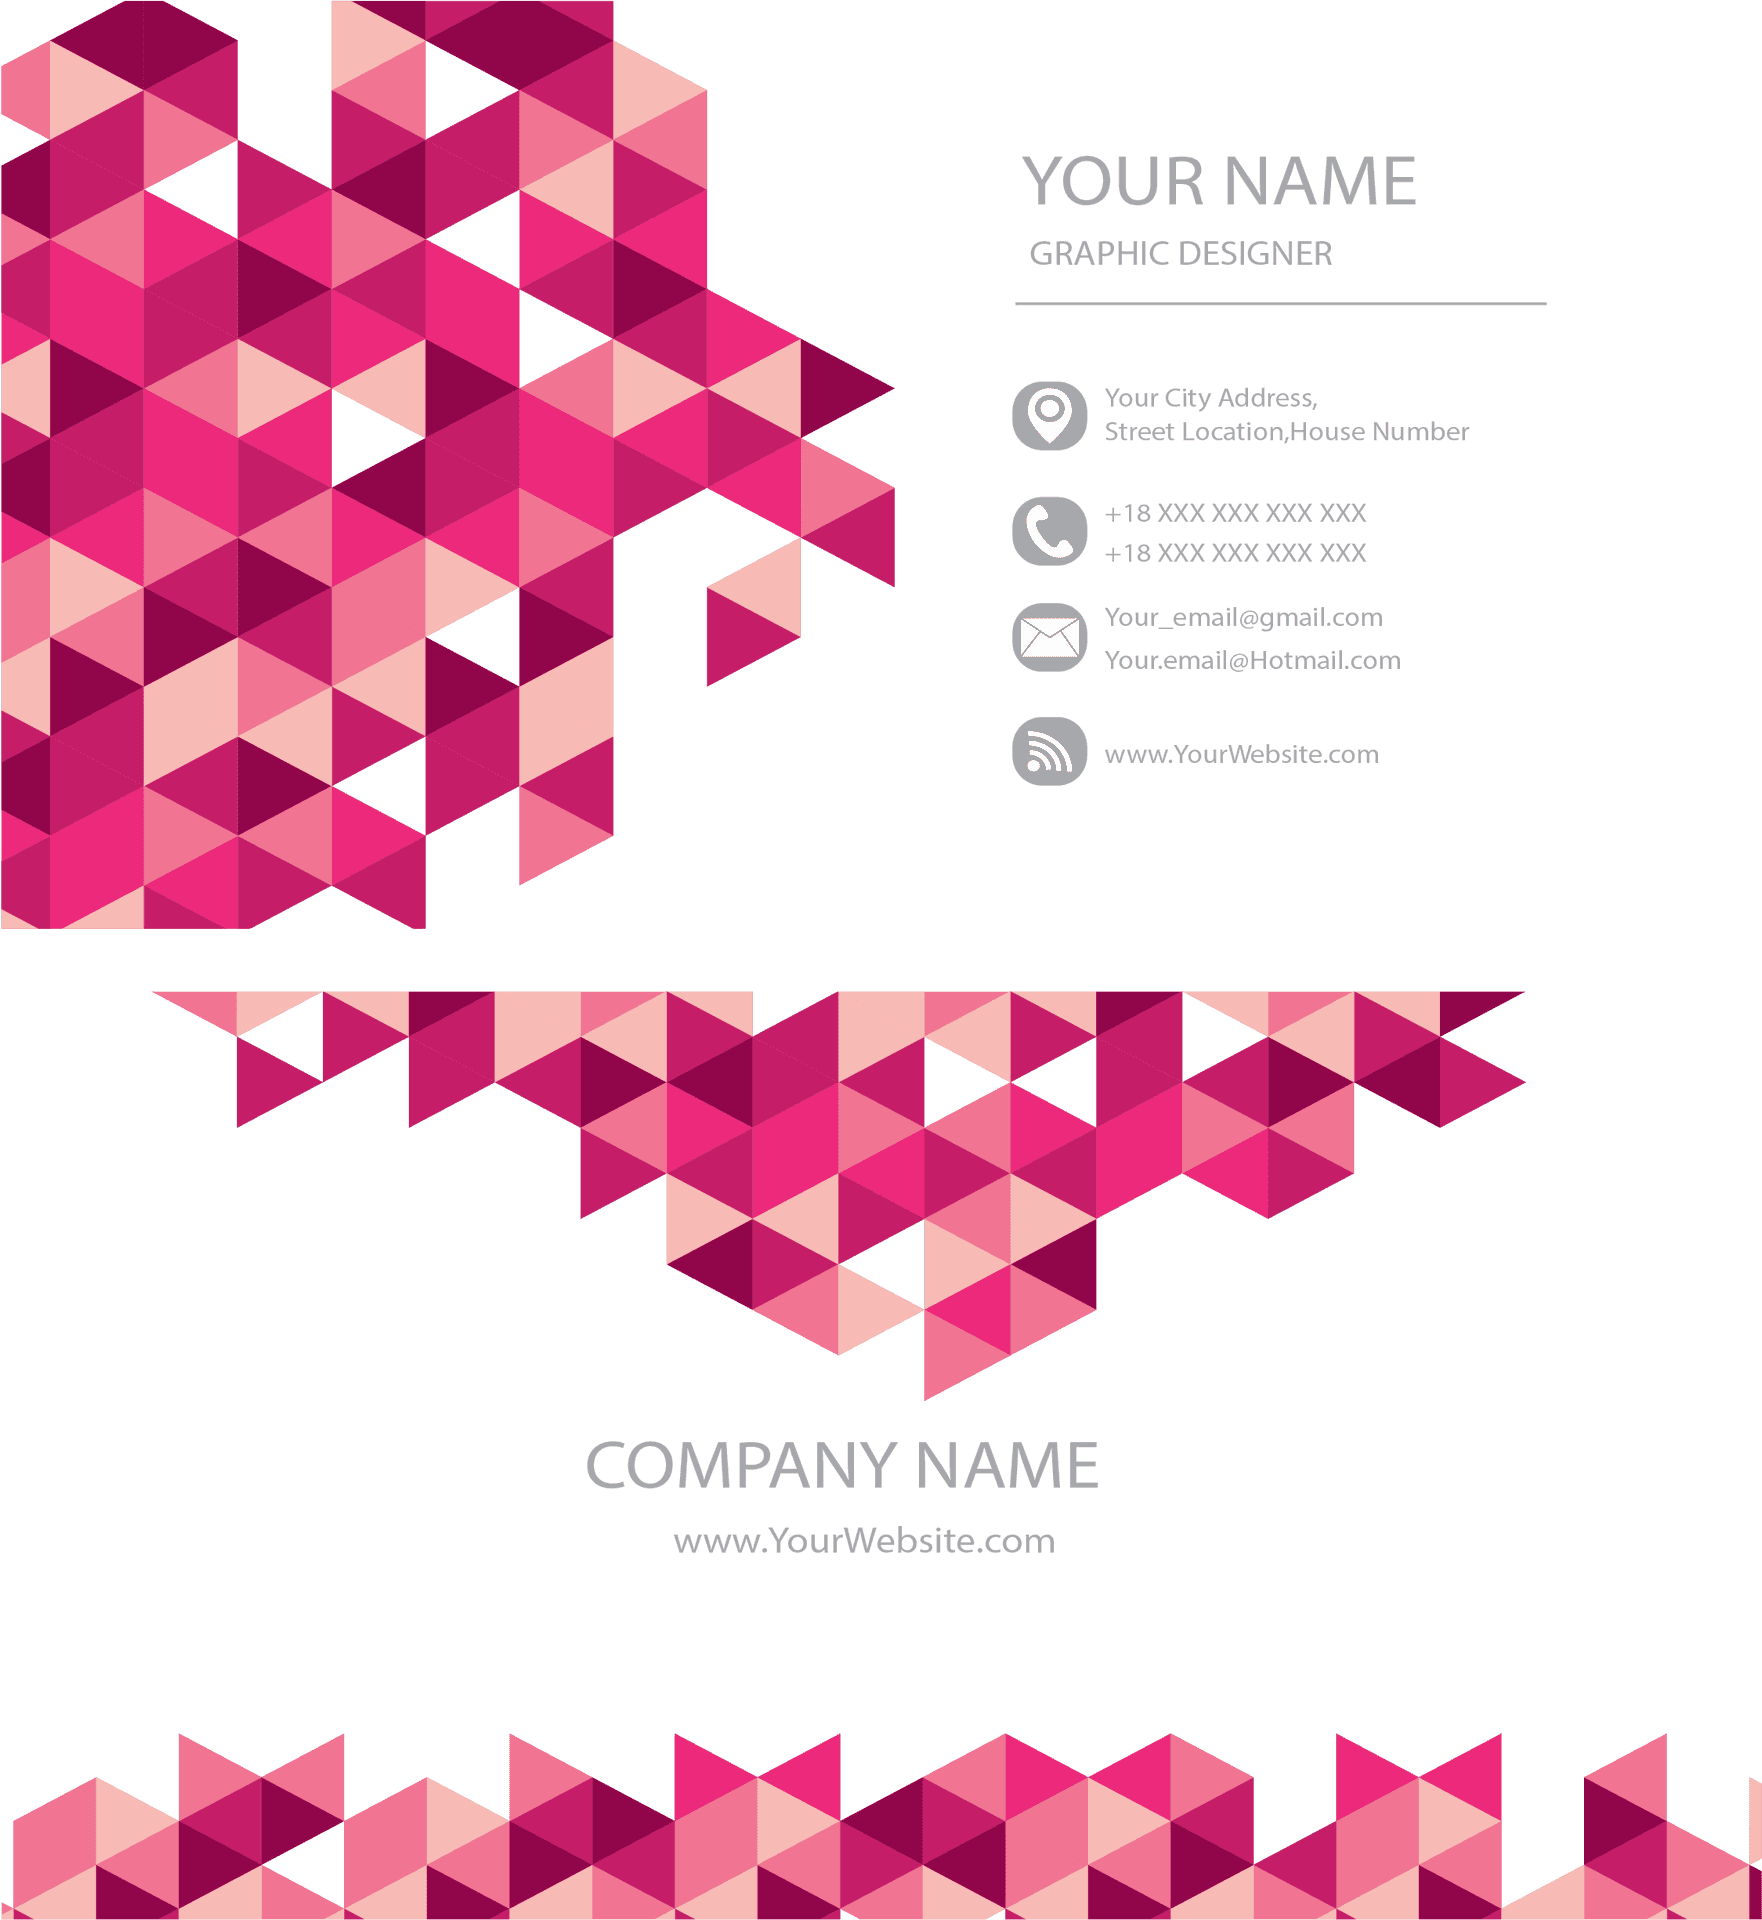 Abstract Geometric Business Card Design PNG image